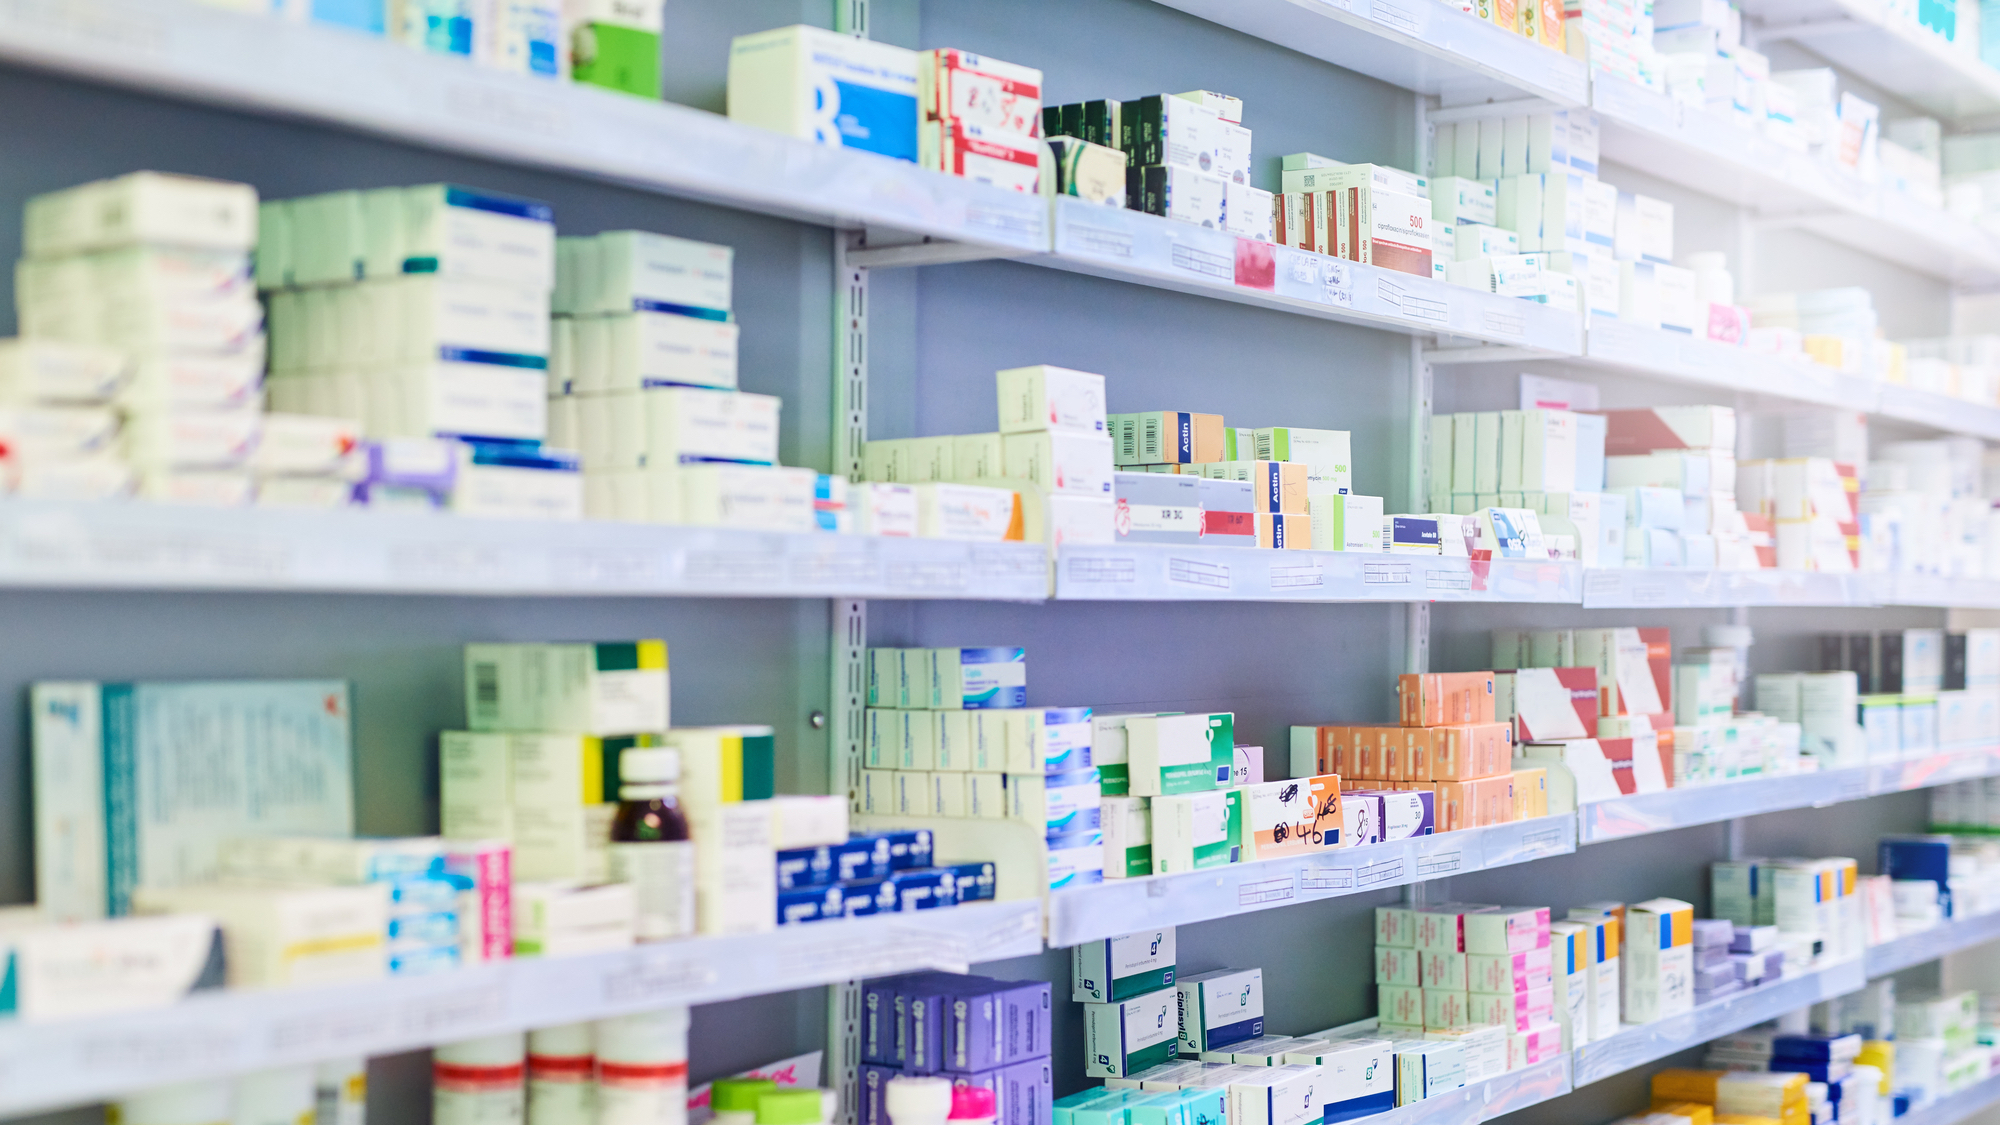 Law enforcements can obtain prescription records from pharmacy giants without a warrant